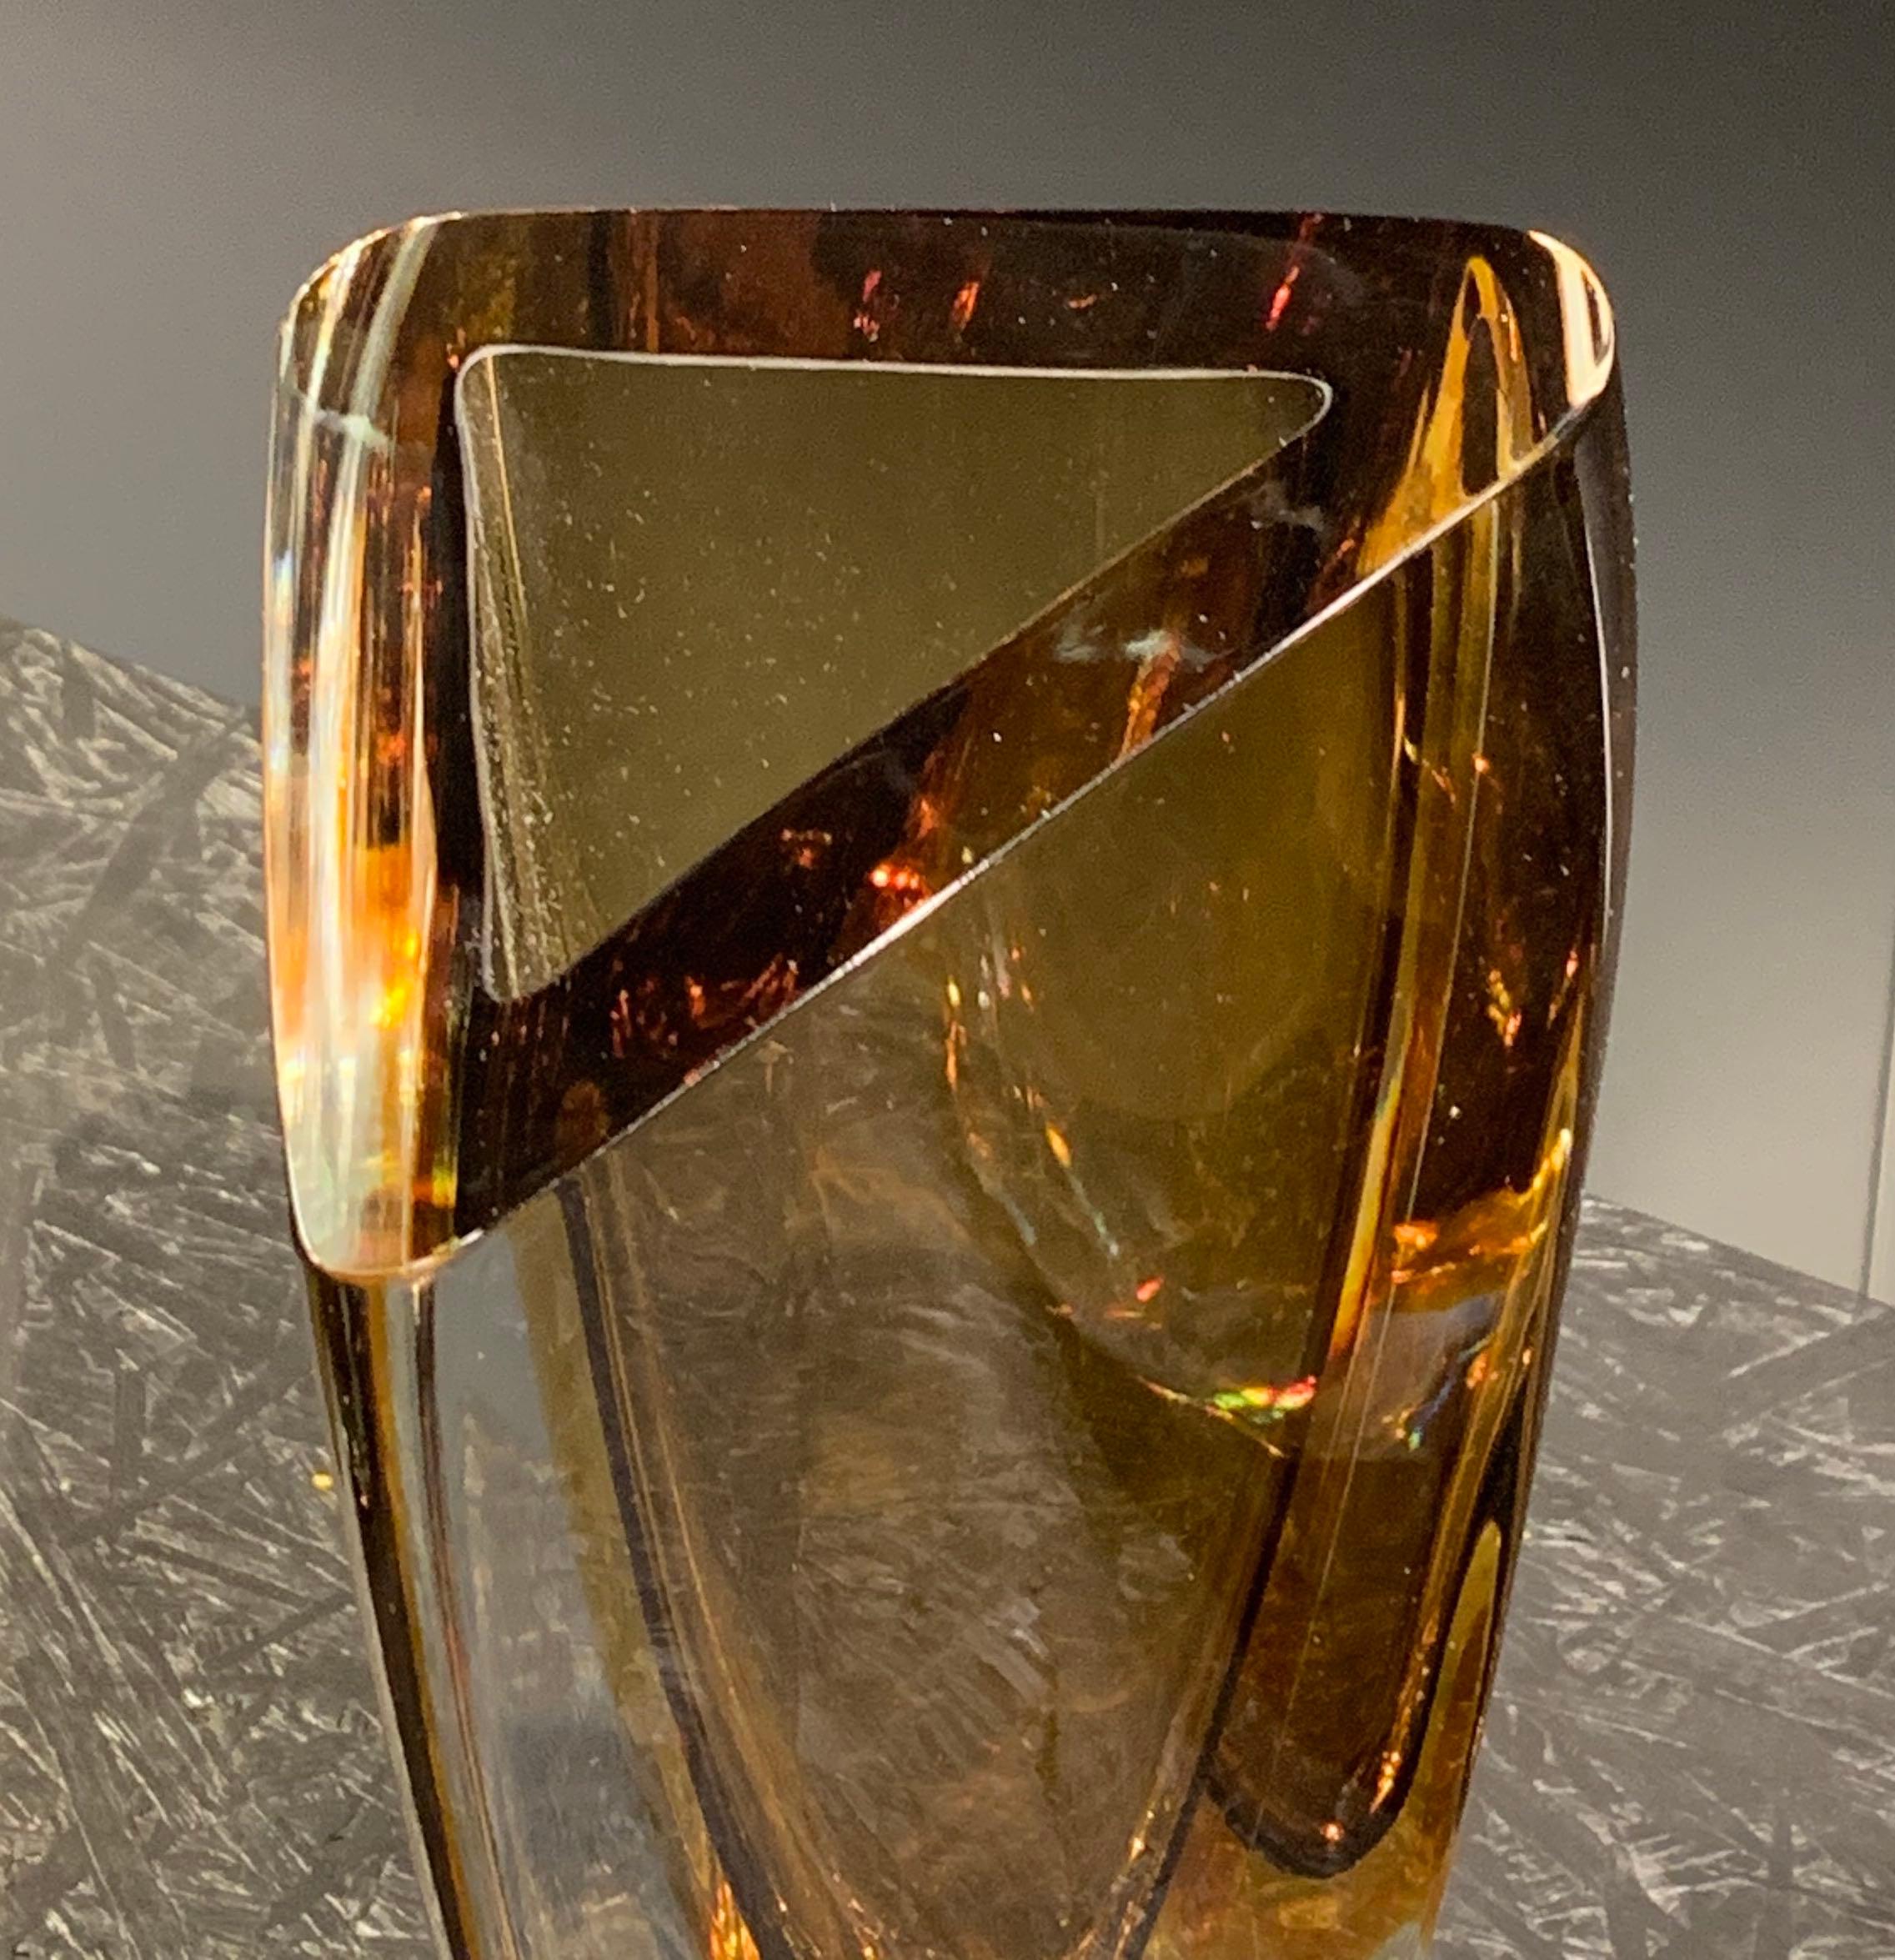 Brazilian thick glass vase with triangular shaped opening.
Amber / clear glass color.
Sits nicely with S5455.
  